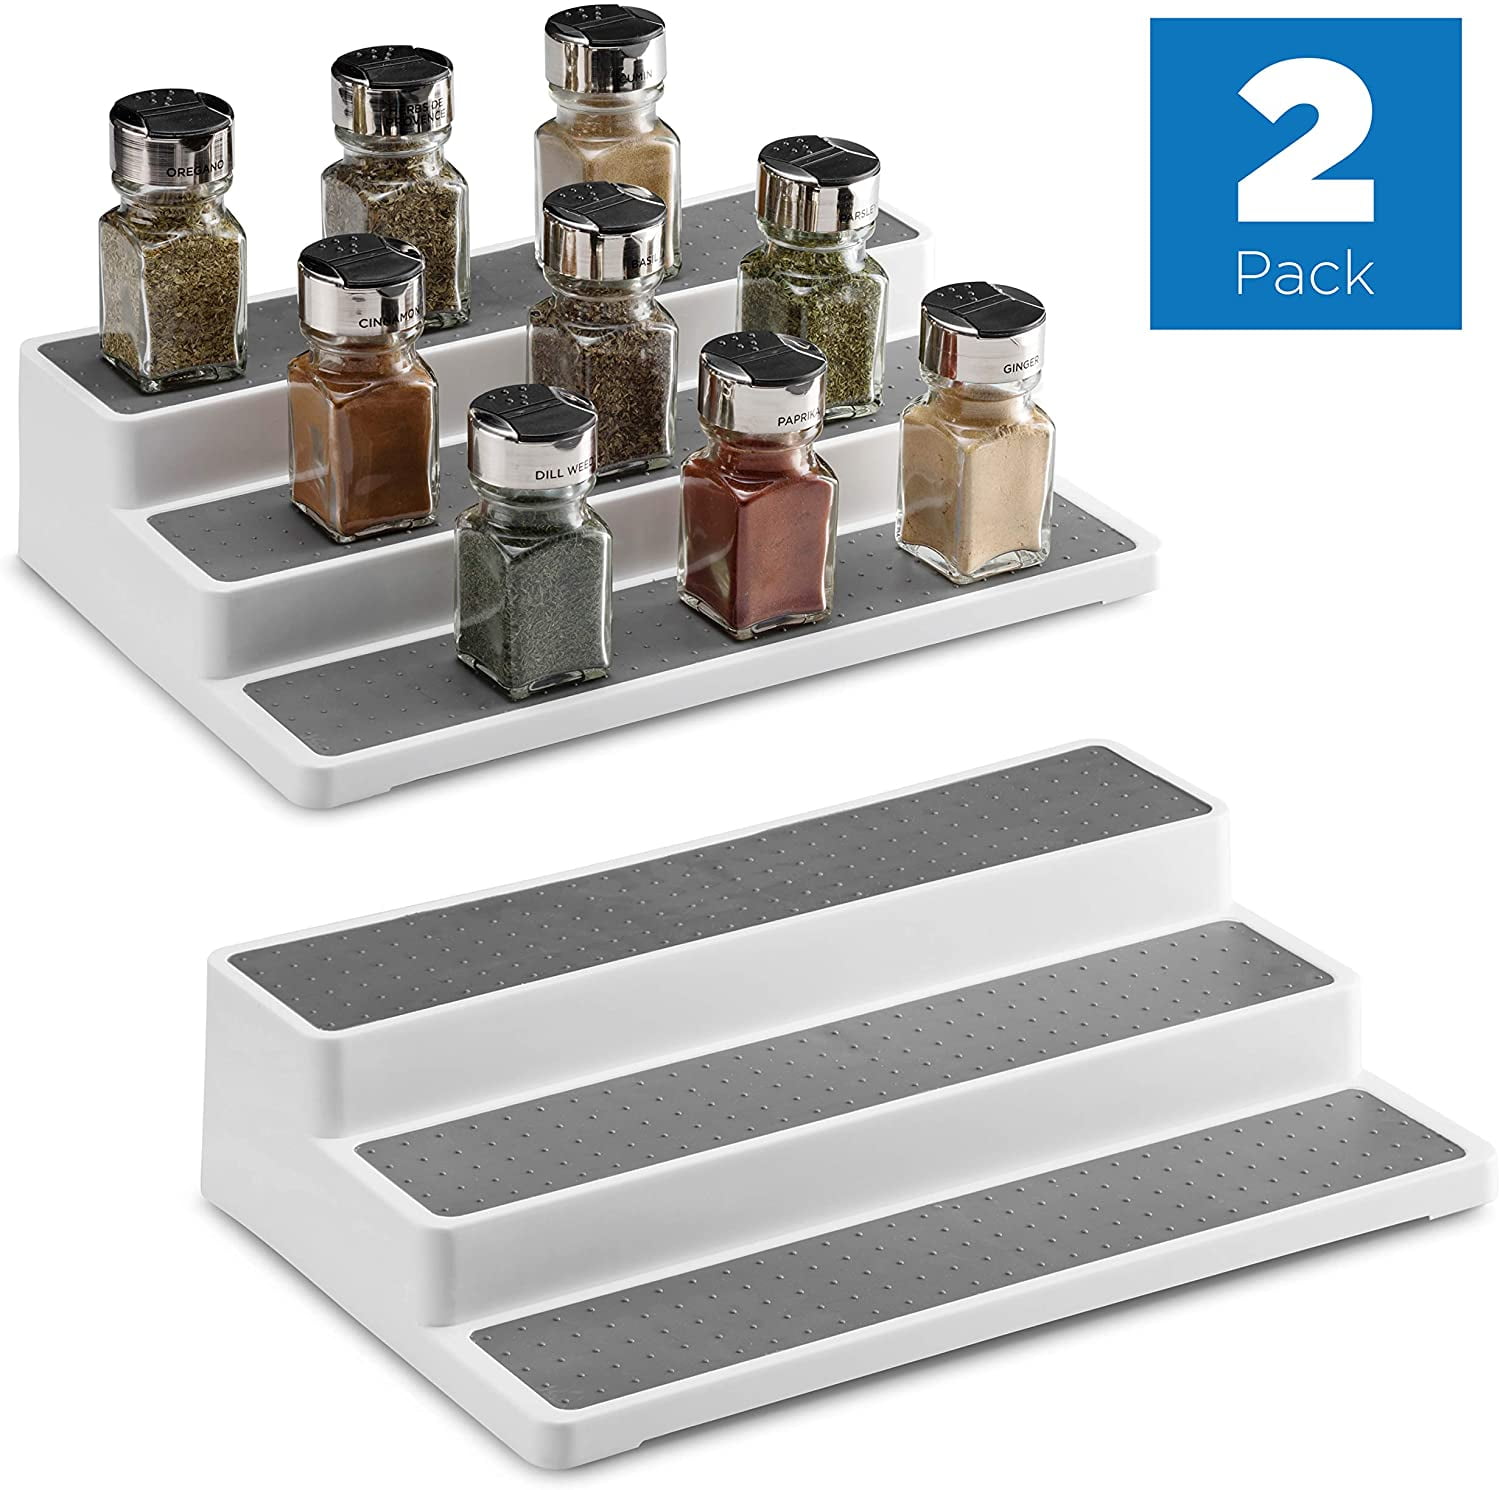 Details about   3-Tier Kitchen Countertop Spice Rack Organizer Cabinet Shelves Rack Hold 